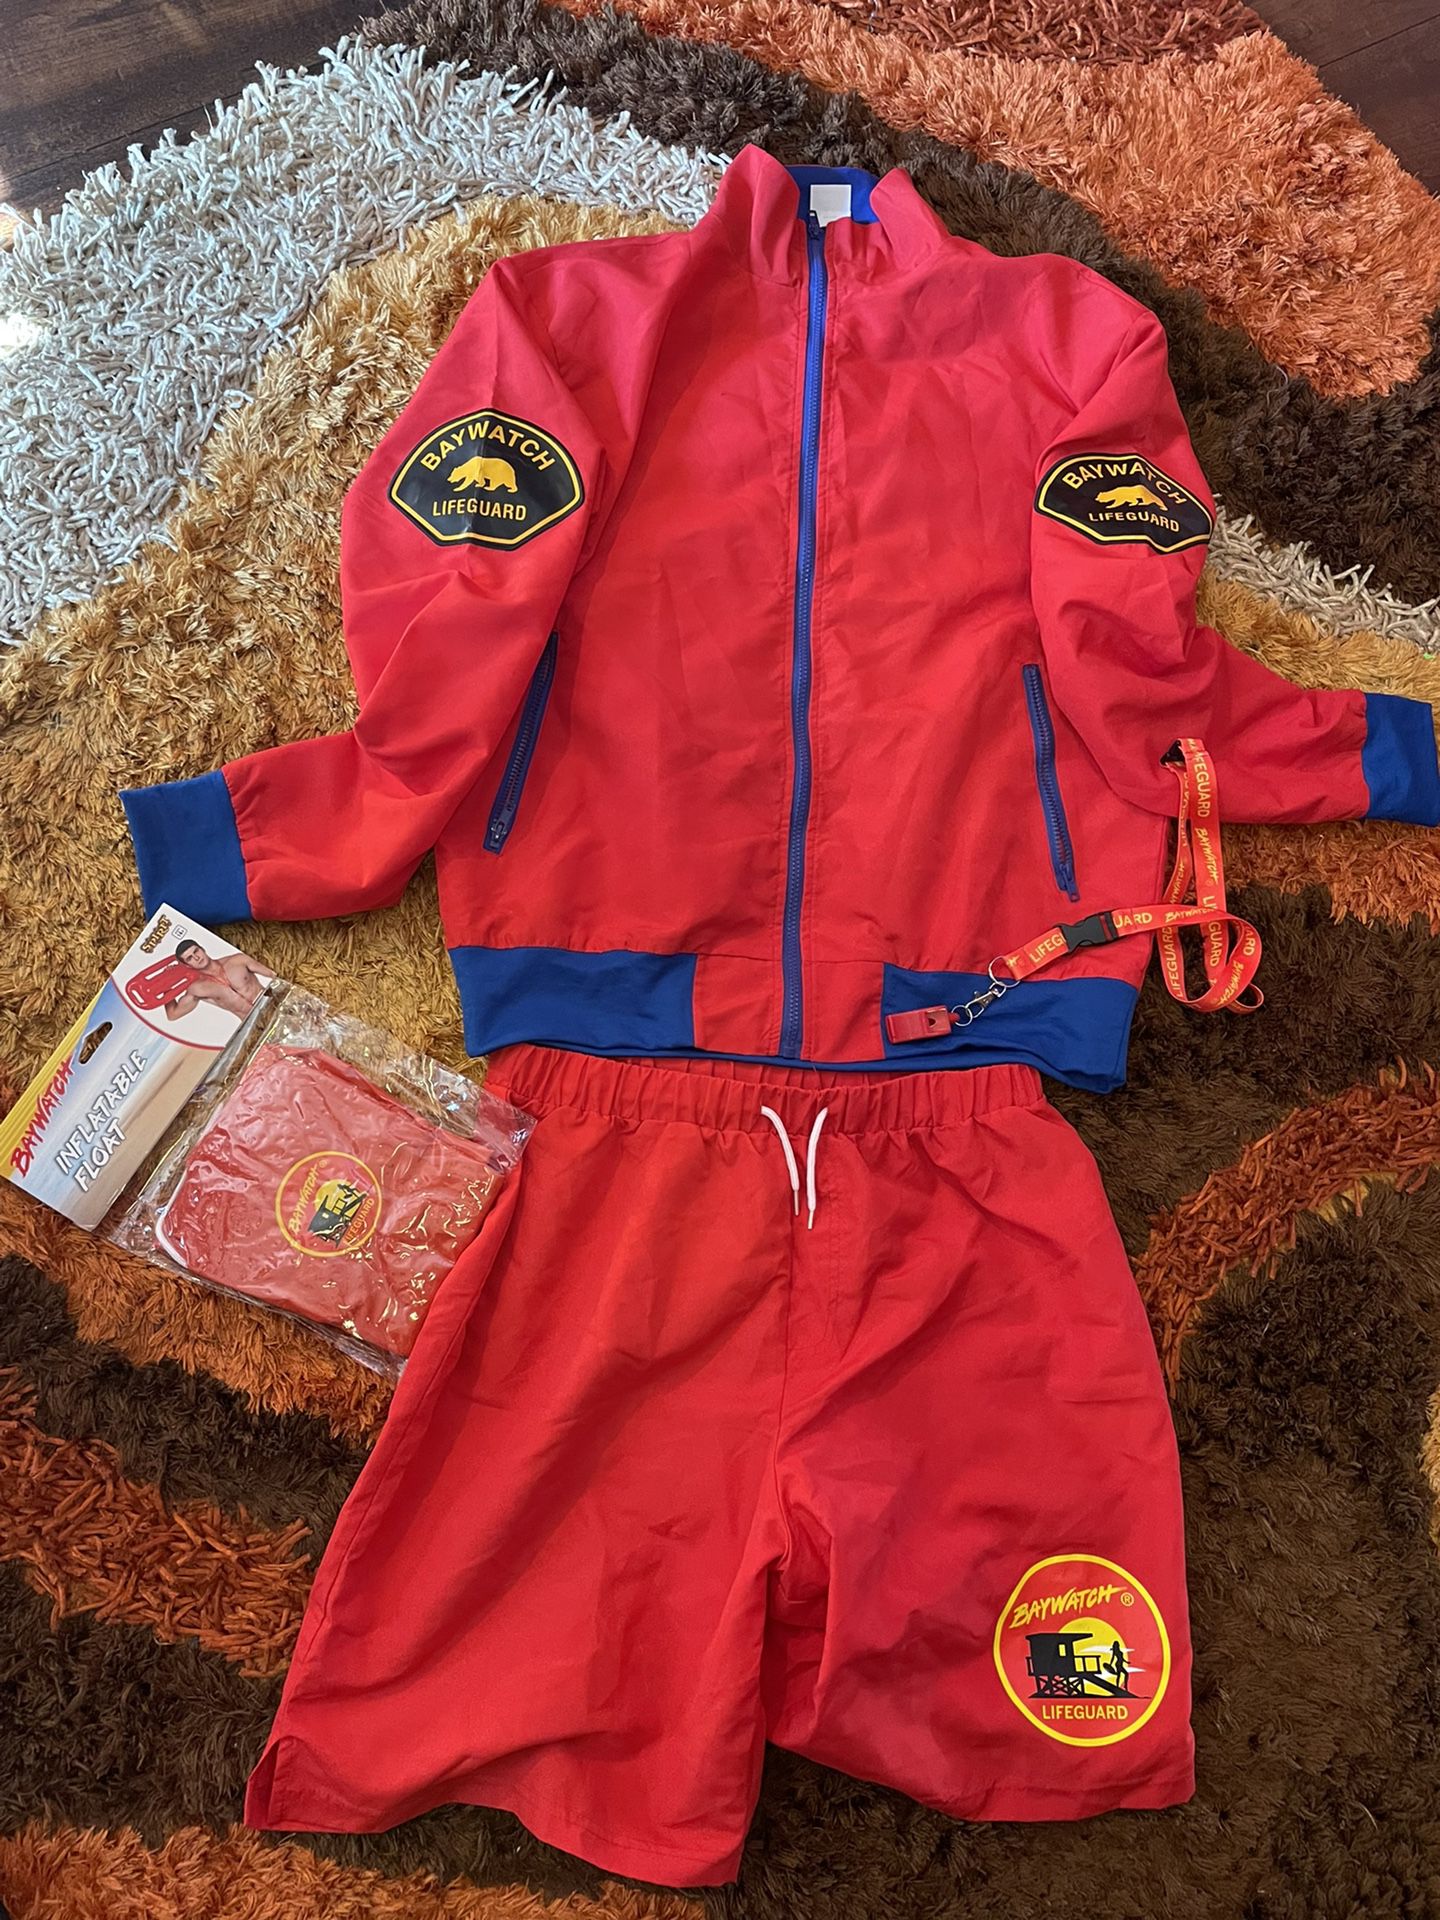 BAY WATCH COSTUME (Adult)